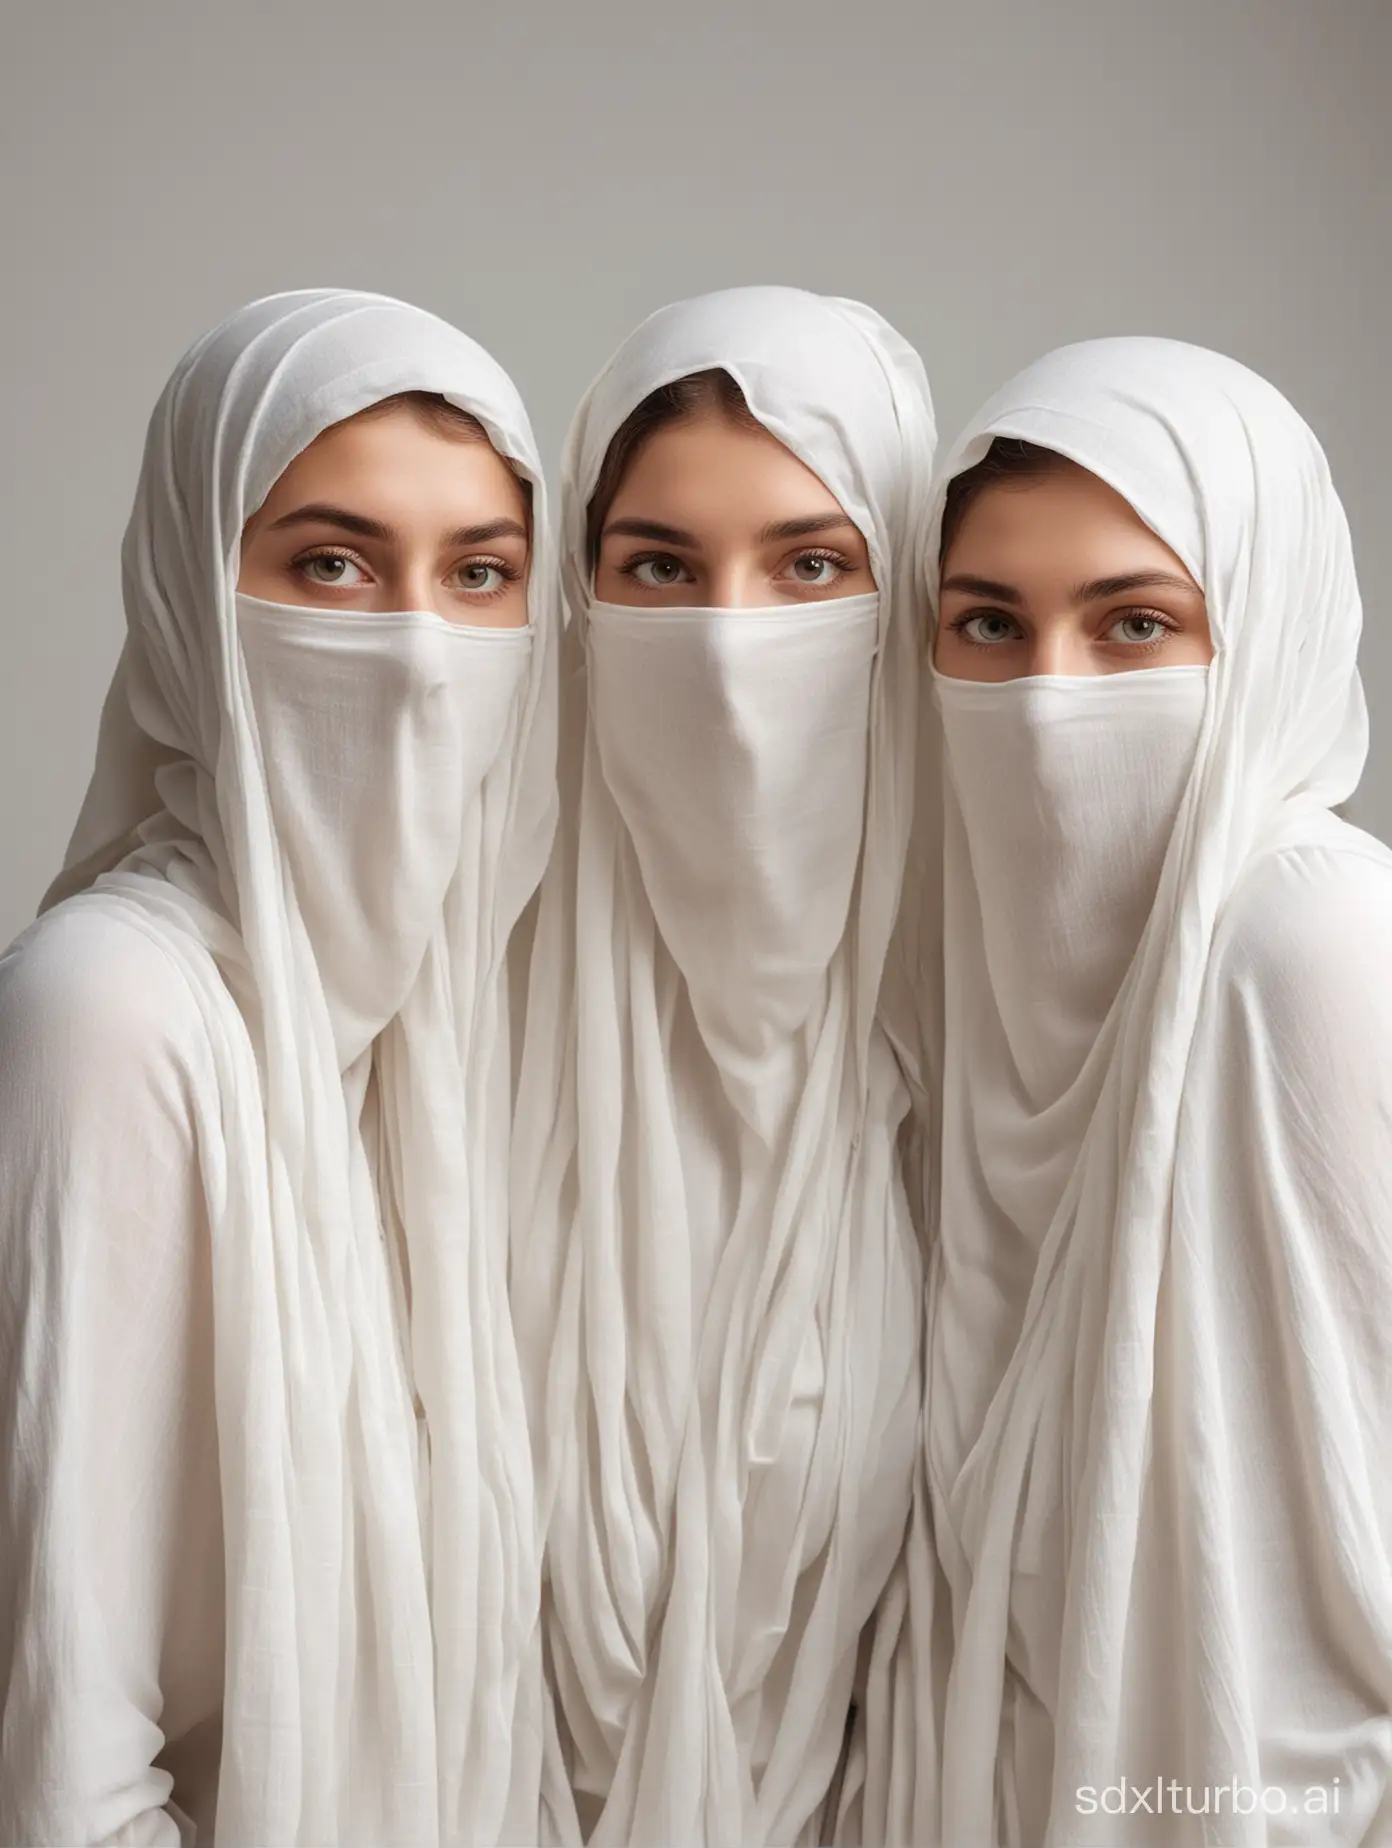 Three young women with their faces covered with white fabric  looking like an ancient Greek statue